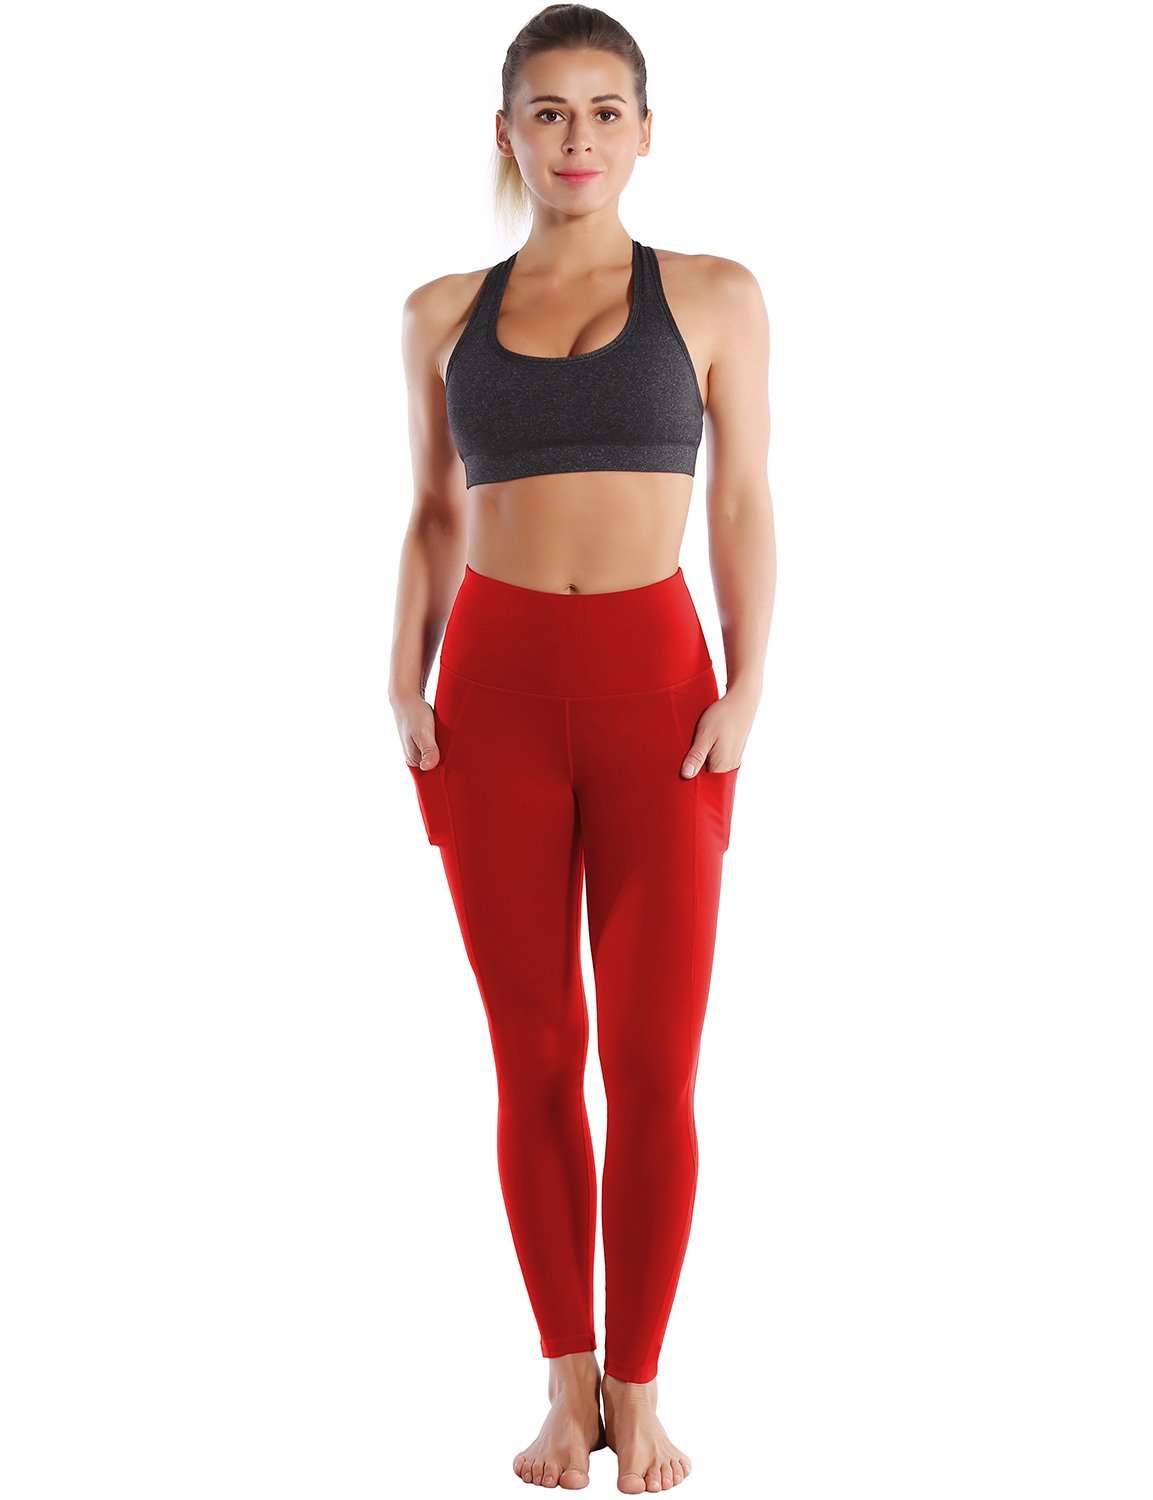 High Waist Side Pockets Jogging Pants scarlet 75% Nylon, 25% Spandex Fabric doesn't attract lint easily 4-way stretch No see-through Moisture-wicking Tummy control Inner pocket